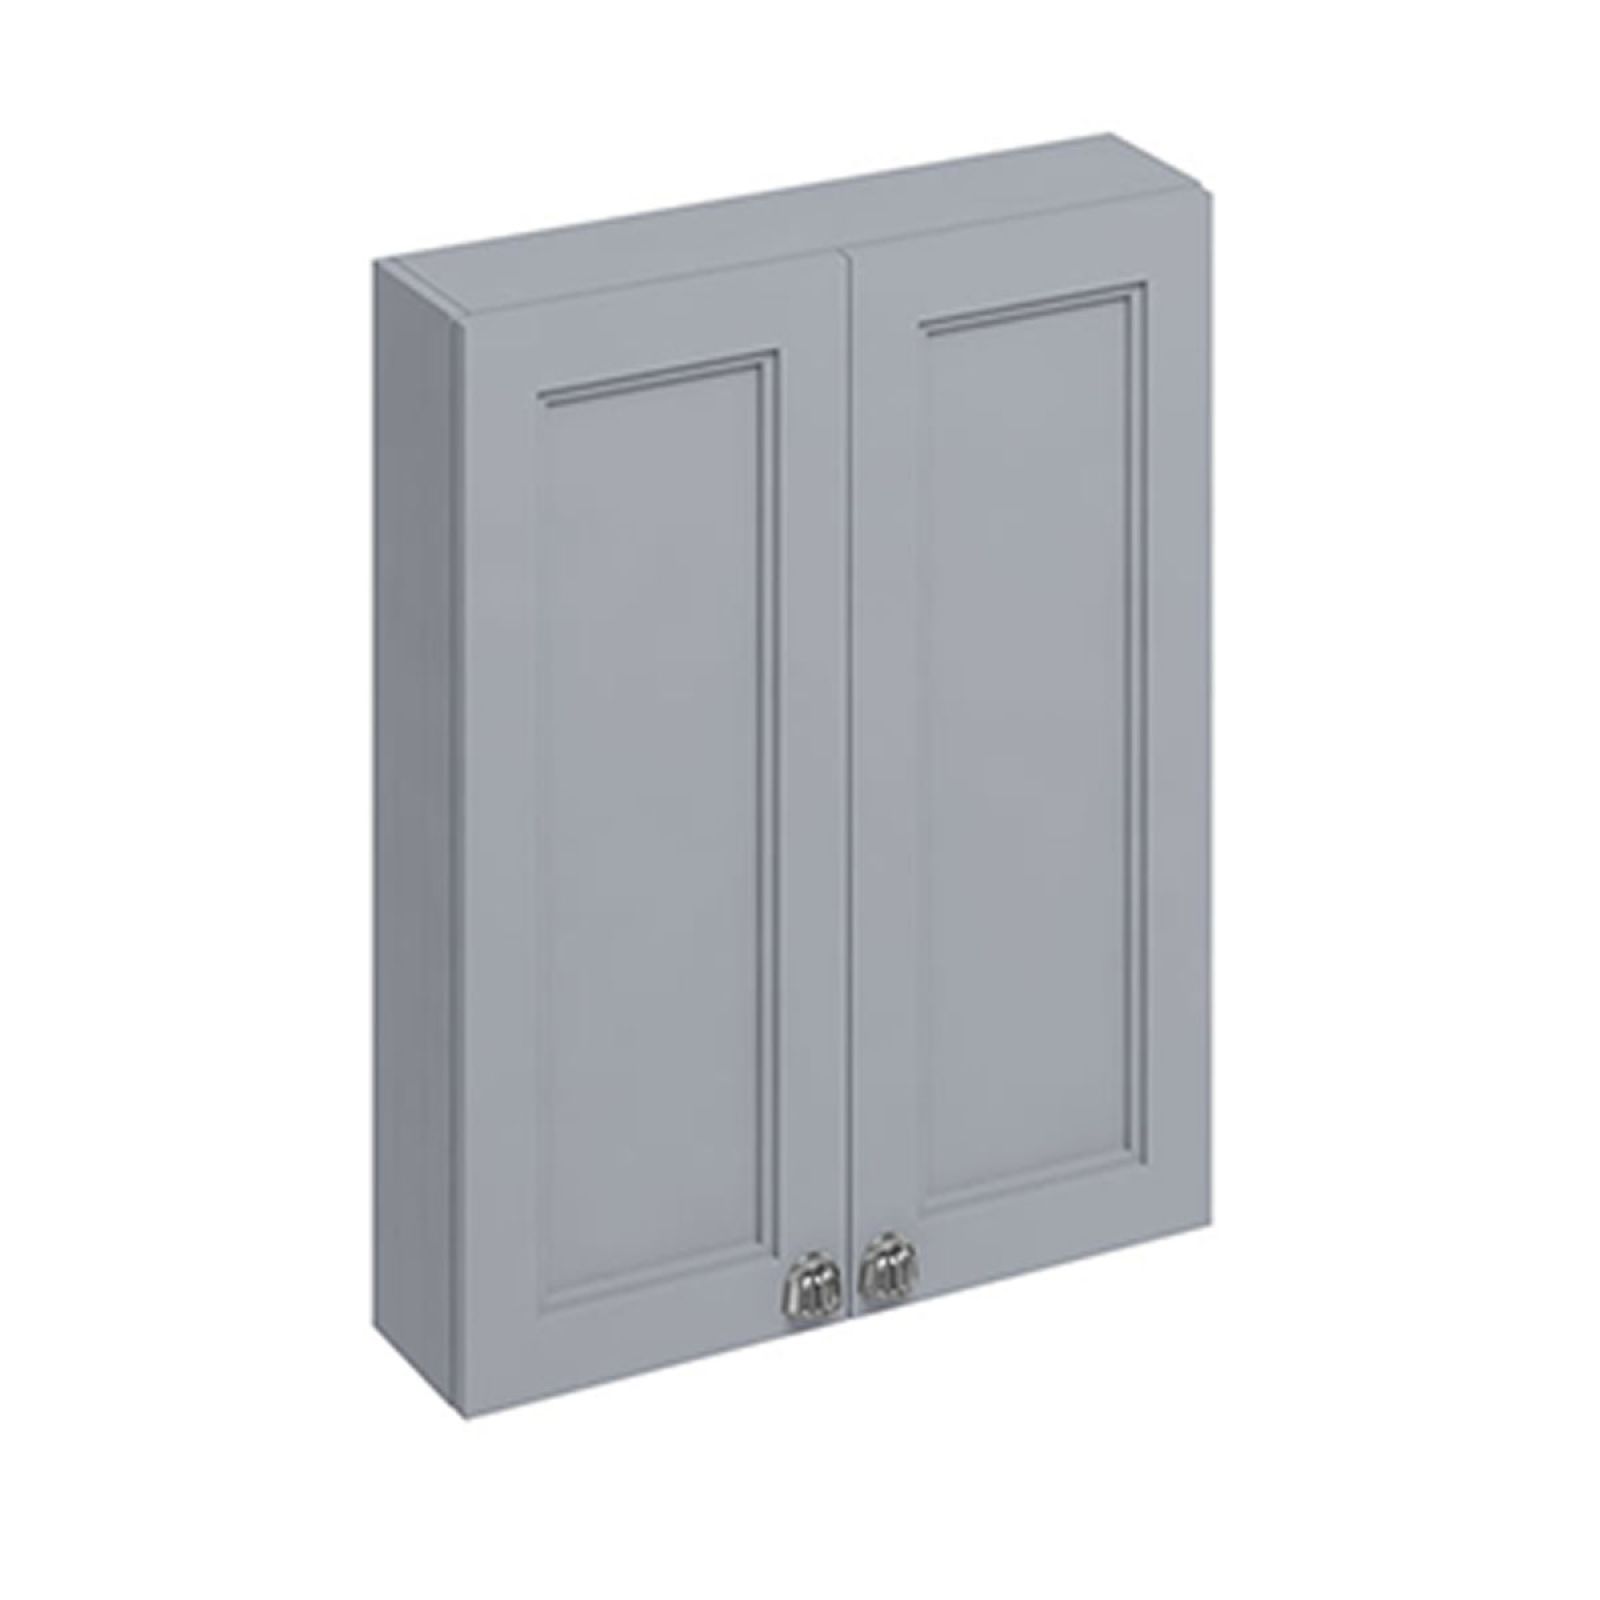 60cm wide double door fitted wall hung unit in a choice of colours